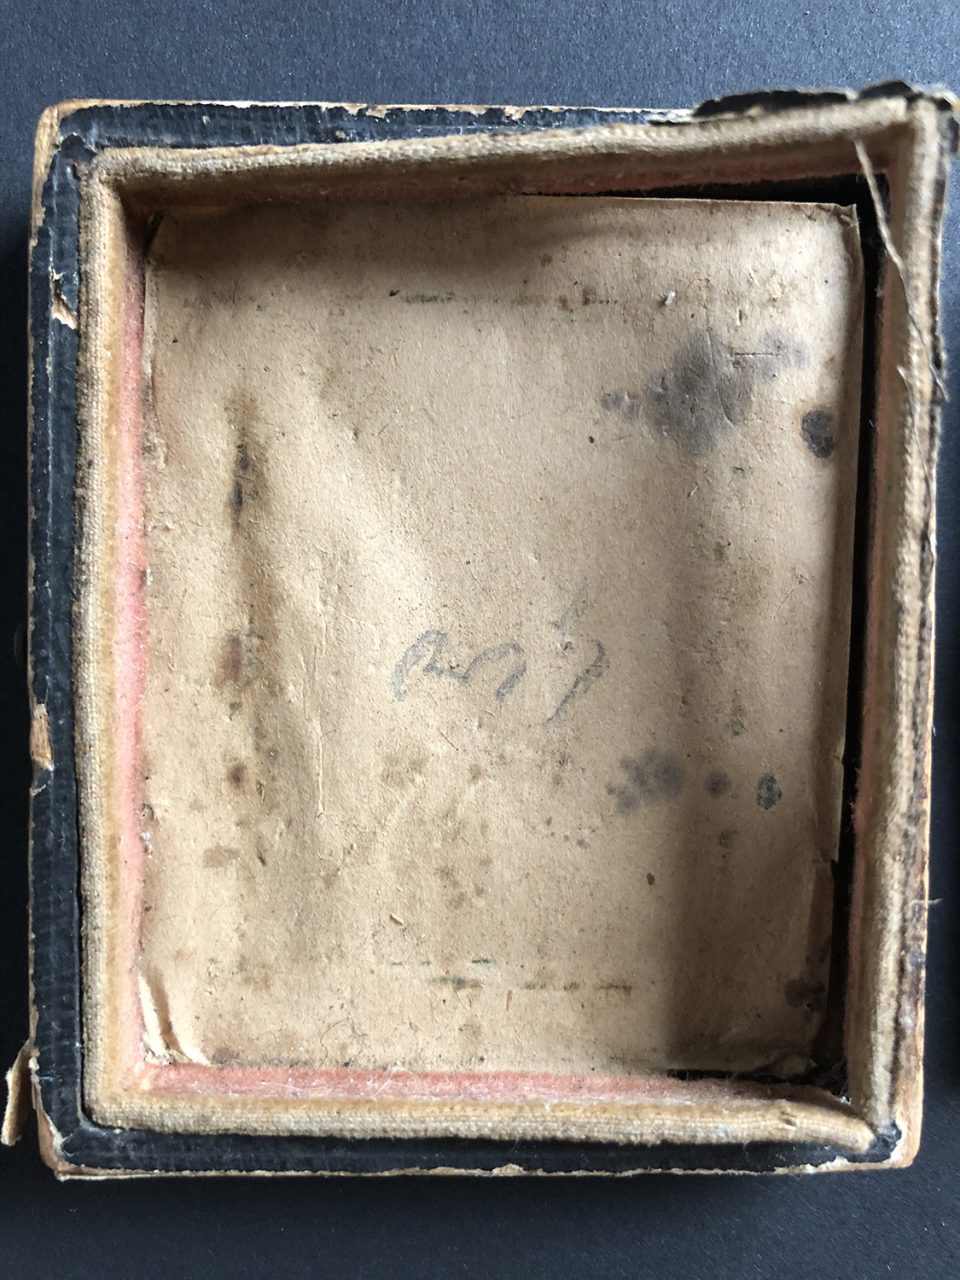 Close-up look at the interior of the tintype case. It's a wooden box with a paper liner and the thick paper (or possibly fabric) seal around the inner edges. Note the "1.00" handwritten in pencil on the paper . . . the hand of a stranger from 160 years ago, not seen by anyone since.